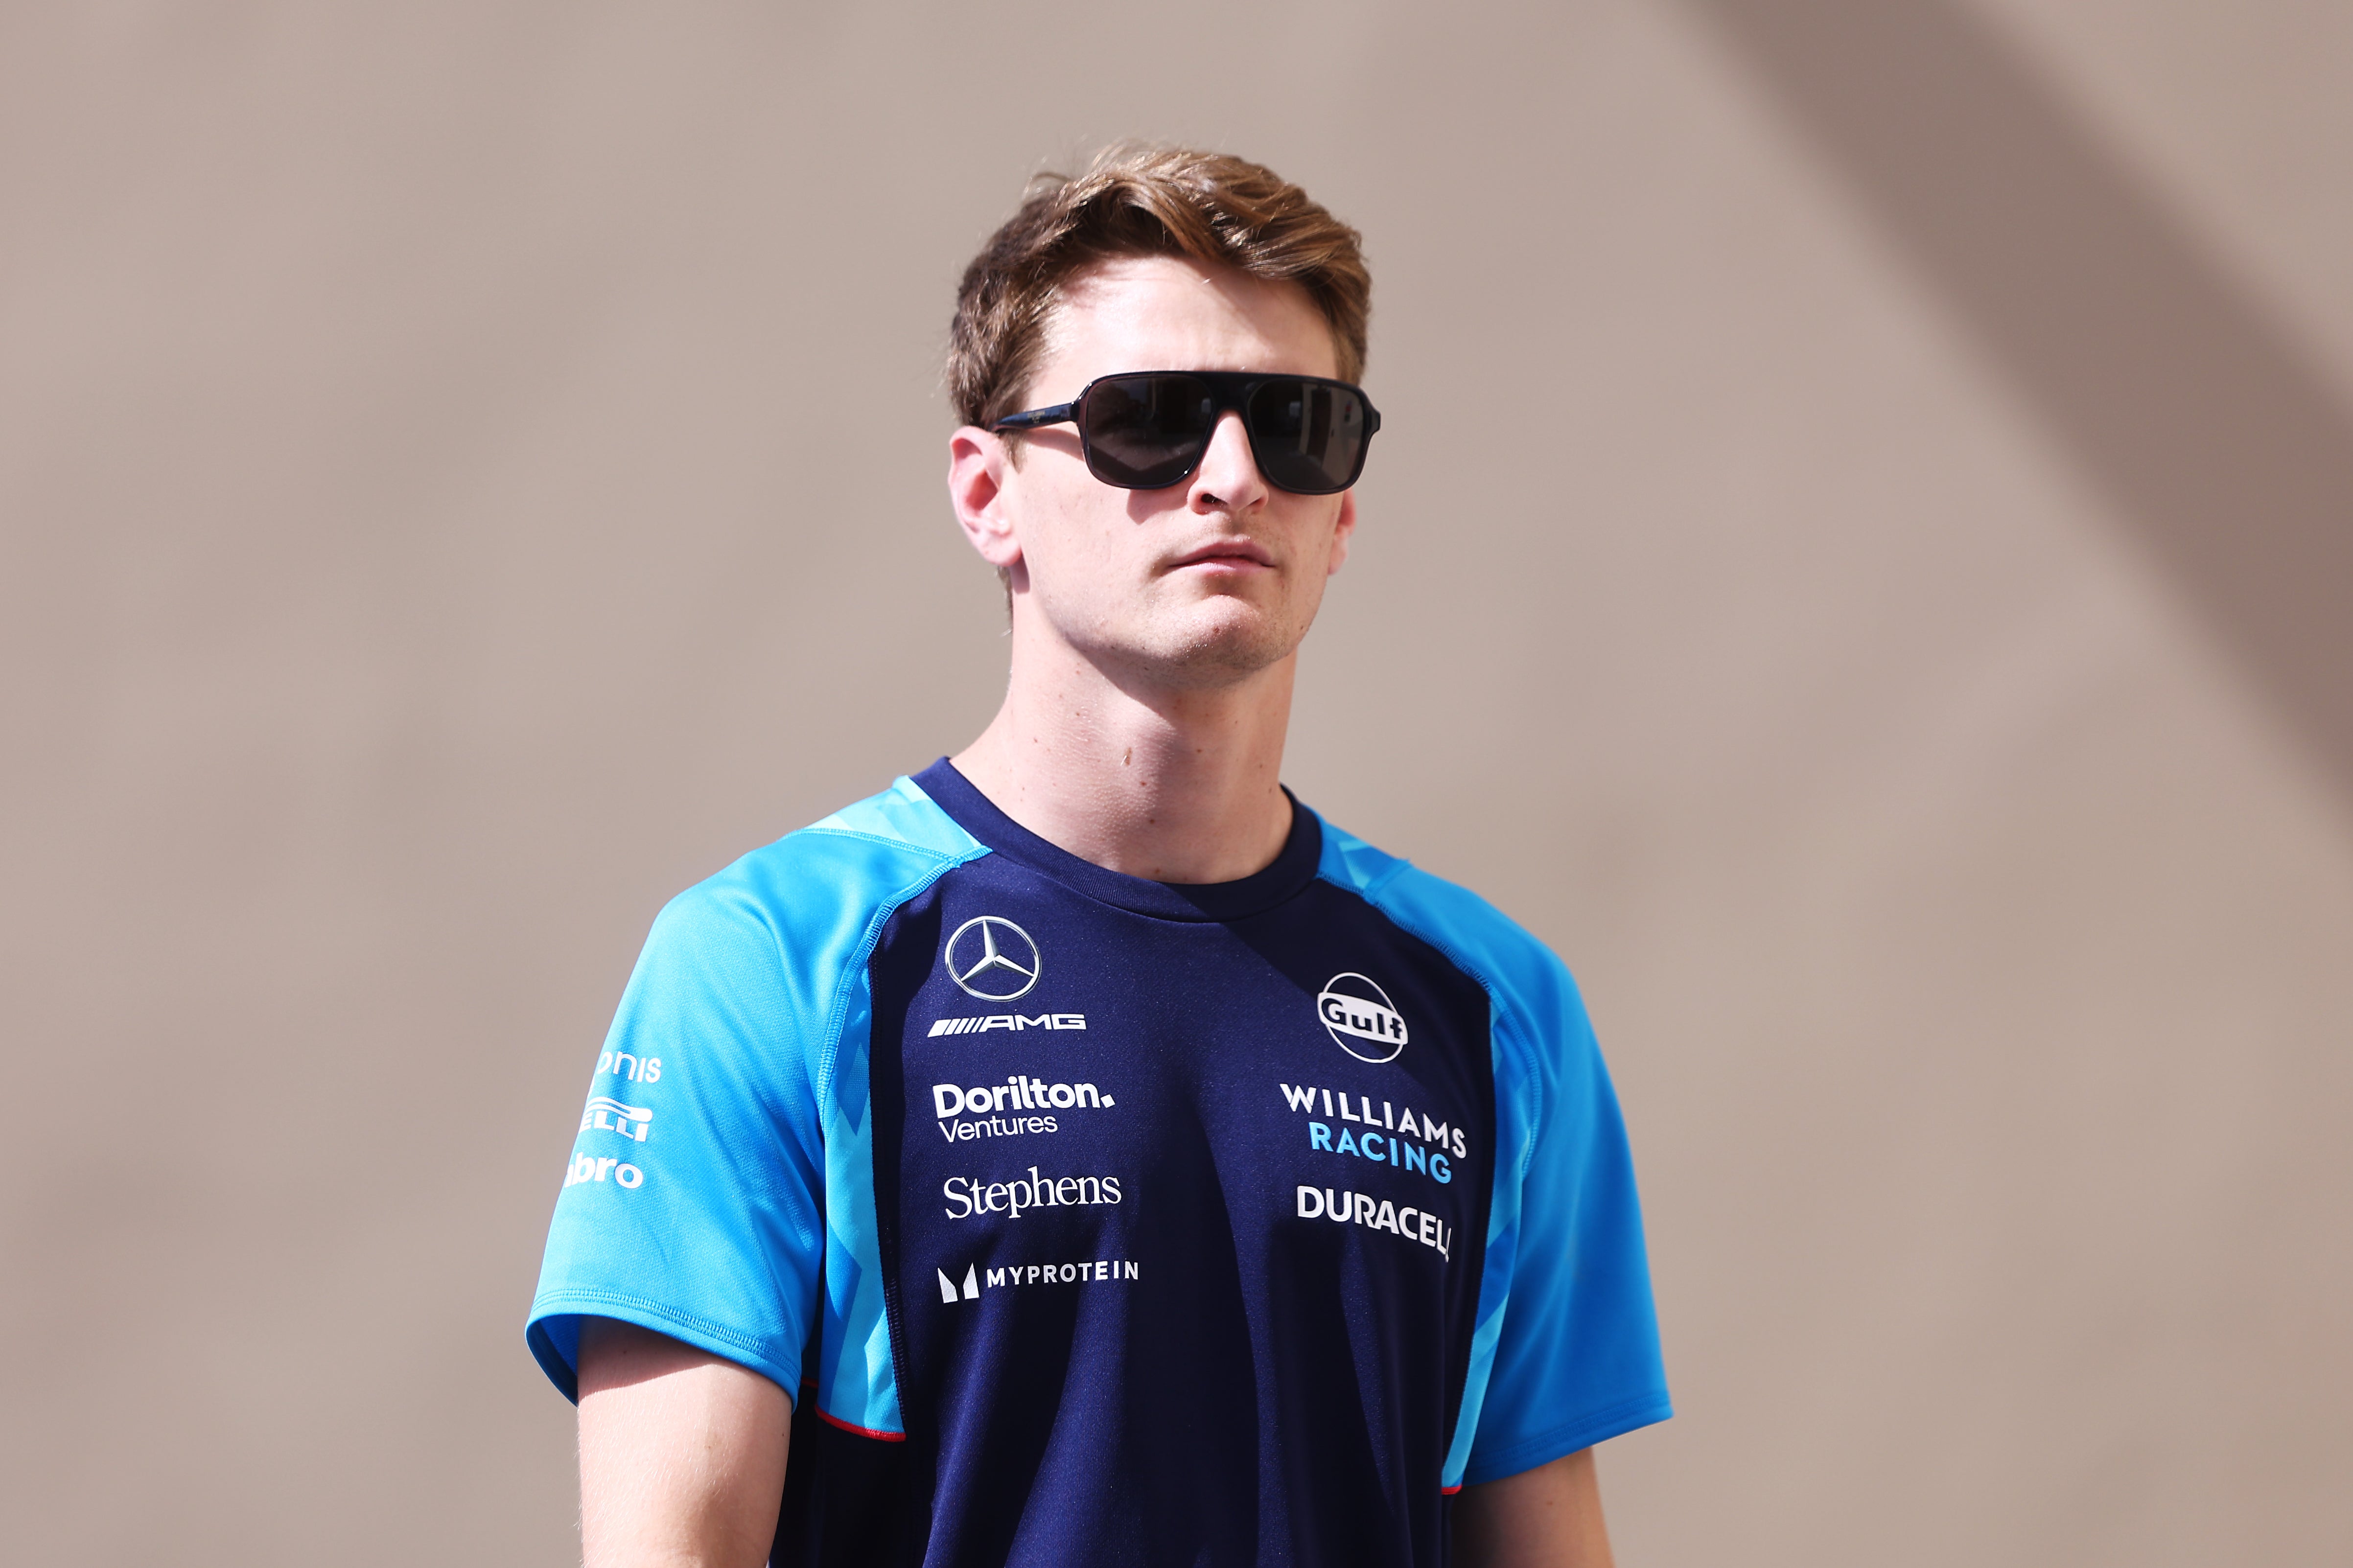 Logan Sargeant is currently bottom of the F1 standings of drivers currently on the grid